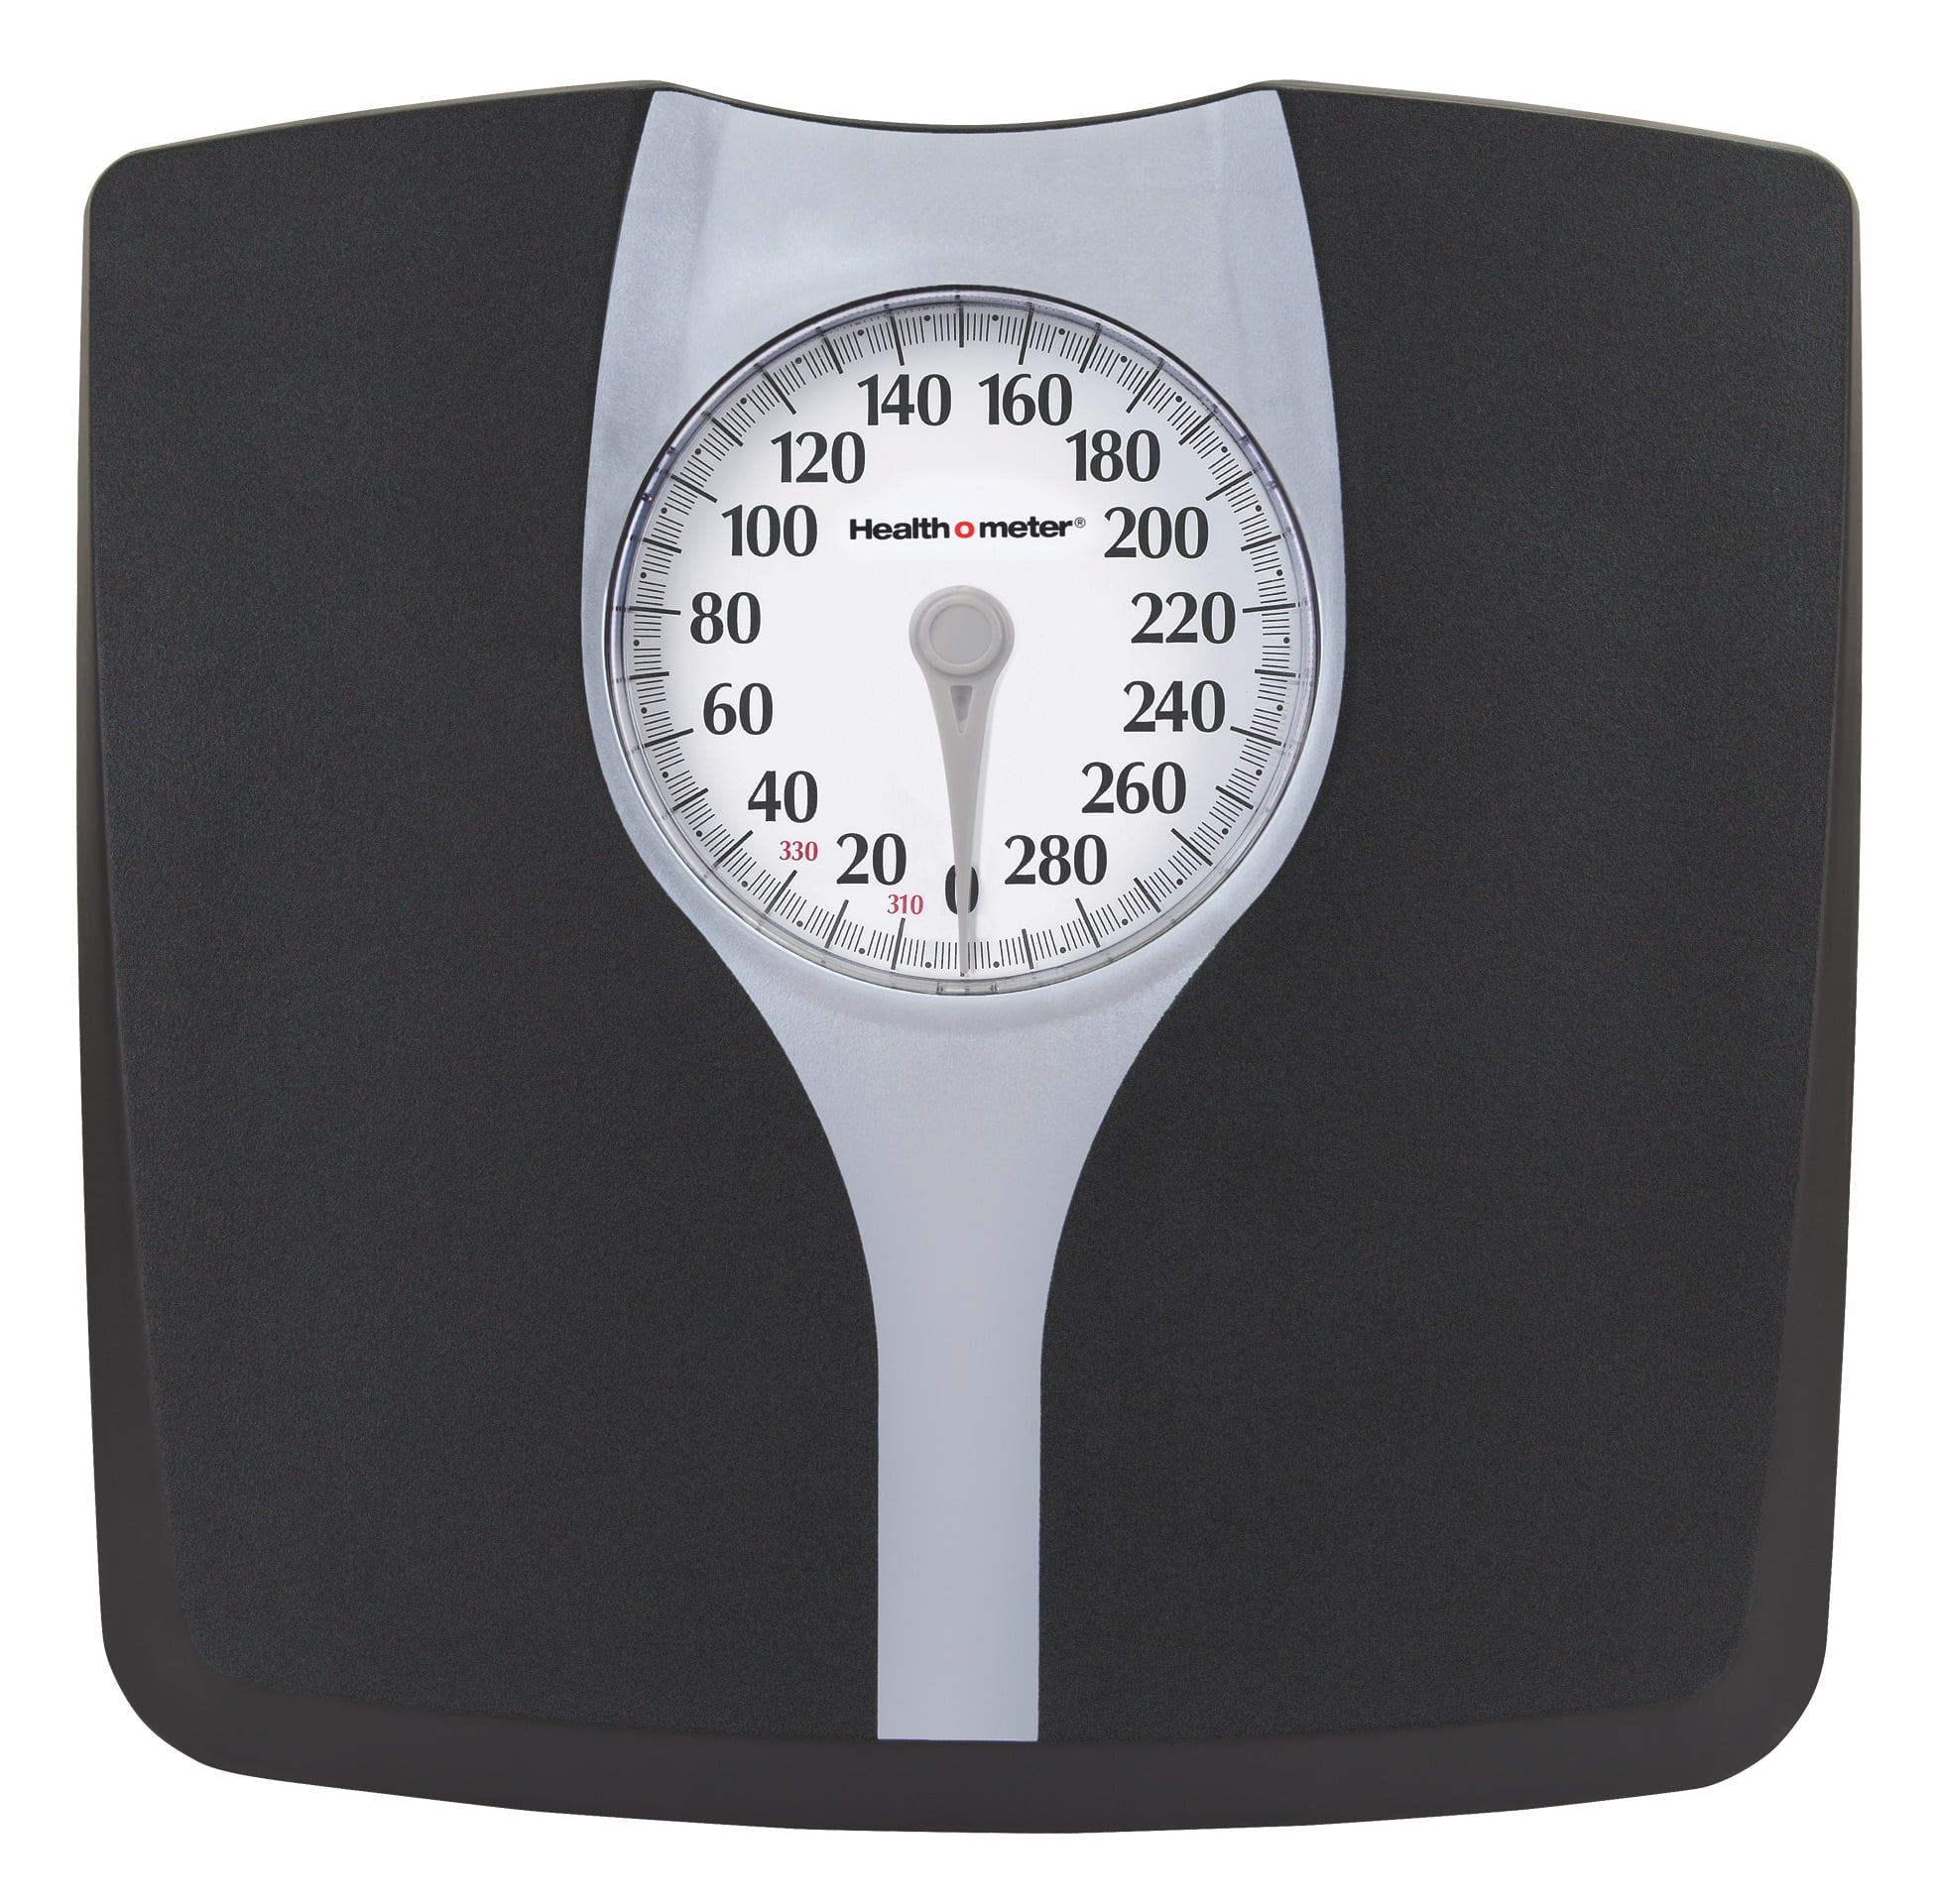 Moon Knight Optima Home Scales FM-330 Form Bathroom Body Weight